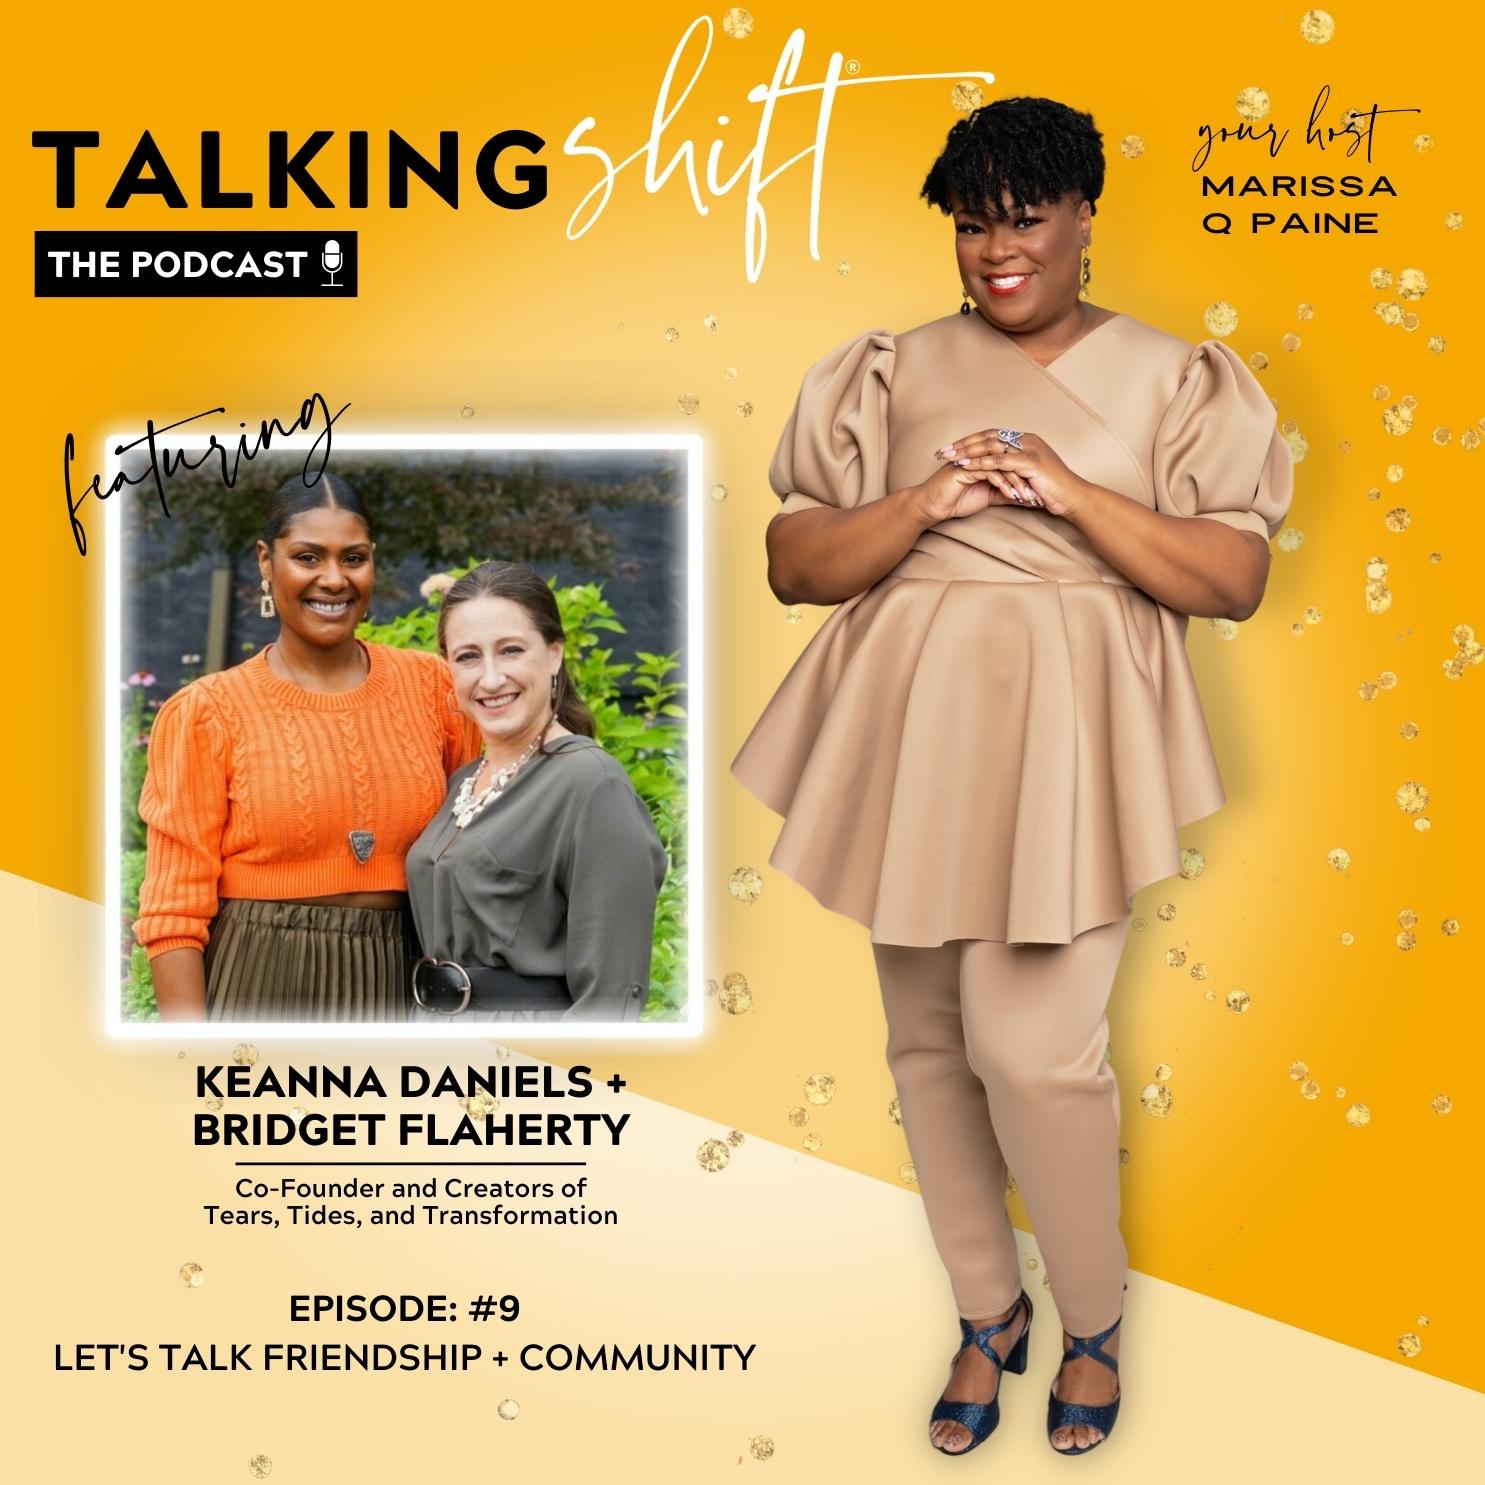 S3-EP09-Let’s Talk Friendship + Community with KeAnna Daniels and Bridget Flaherty